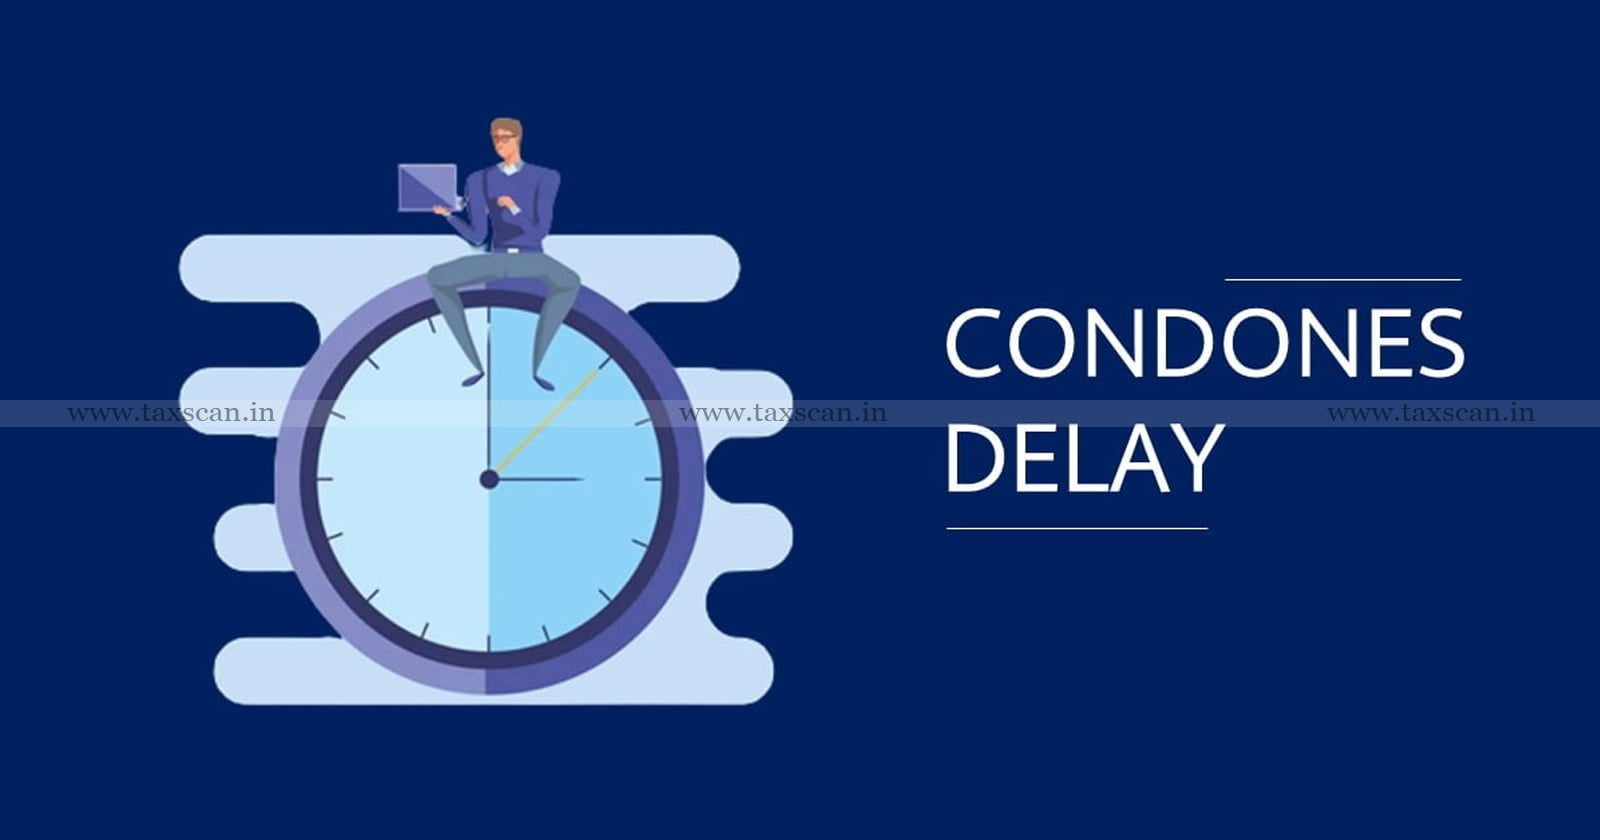 CBDT revises Monetary Limits - Condonation of Delay in Refund - Loss Carry Forward Claims -Condonation of Delay in Loss Carry Forward Claims - CBDT - taxscan